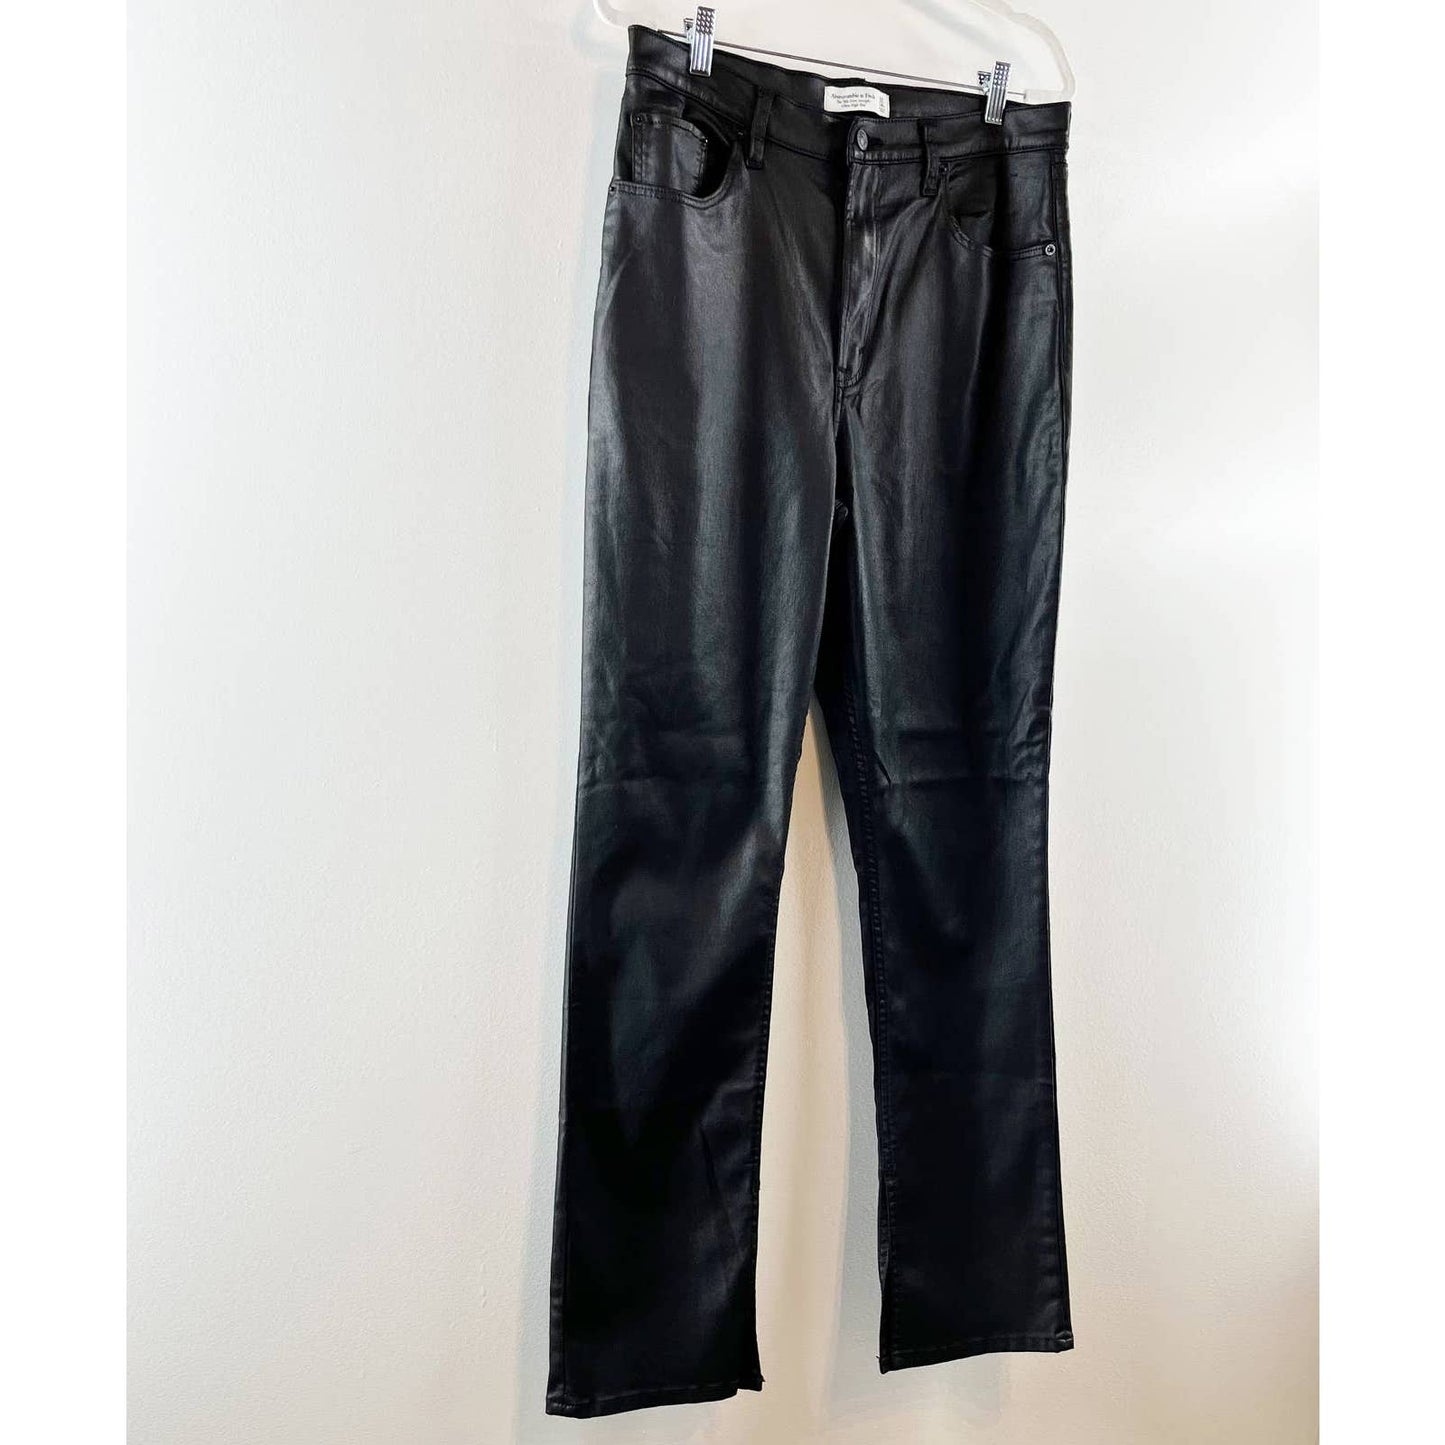 Abercrombie & Fitch Ultra High Rise 90's Slim Straight Jeans Coated Black 14 R